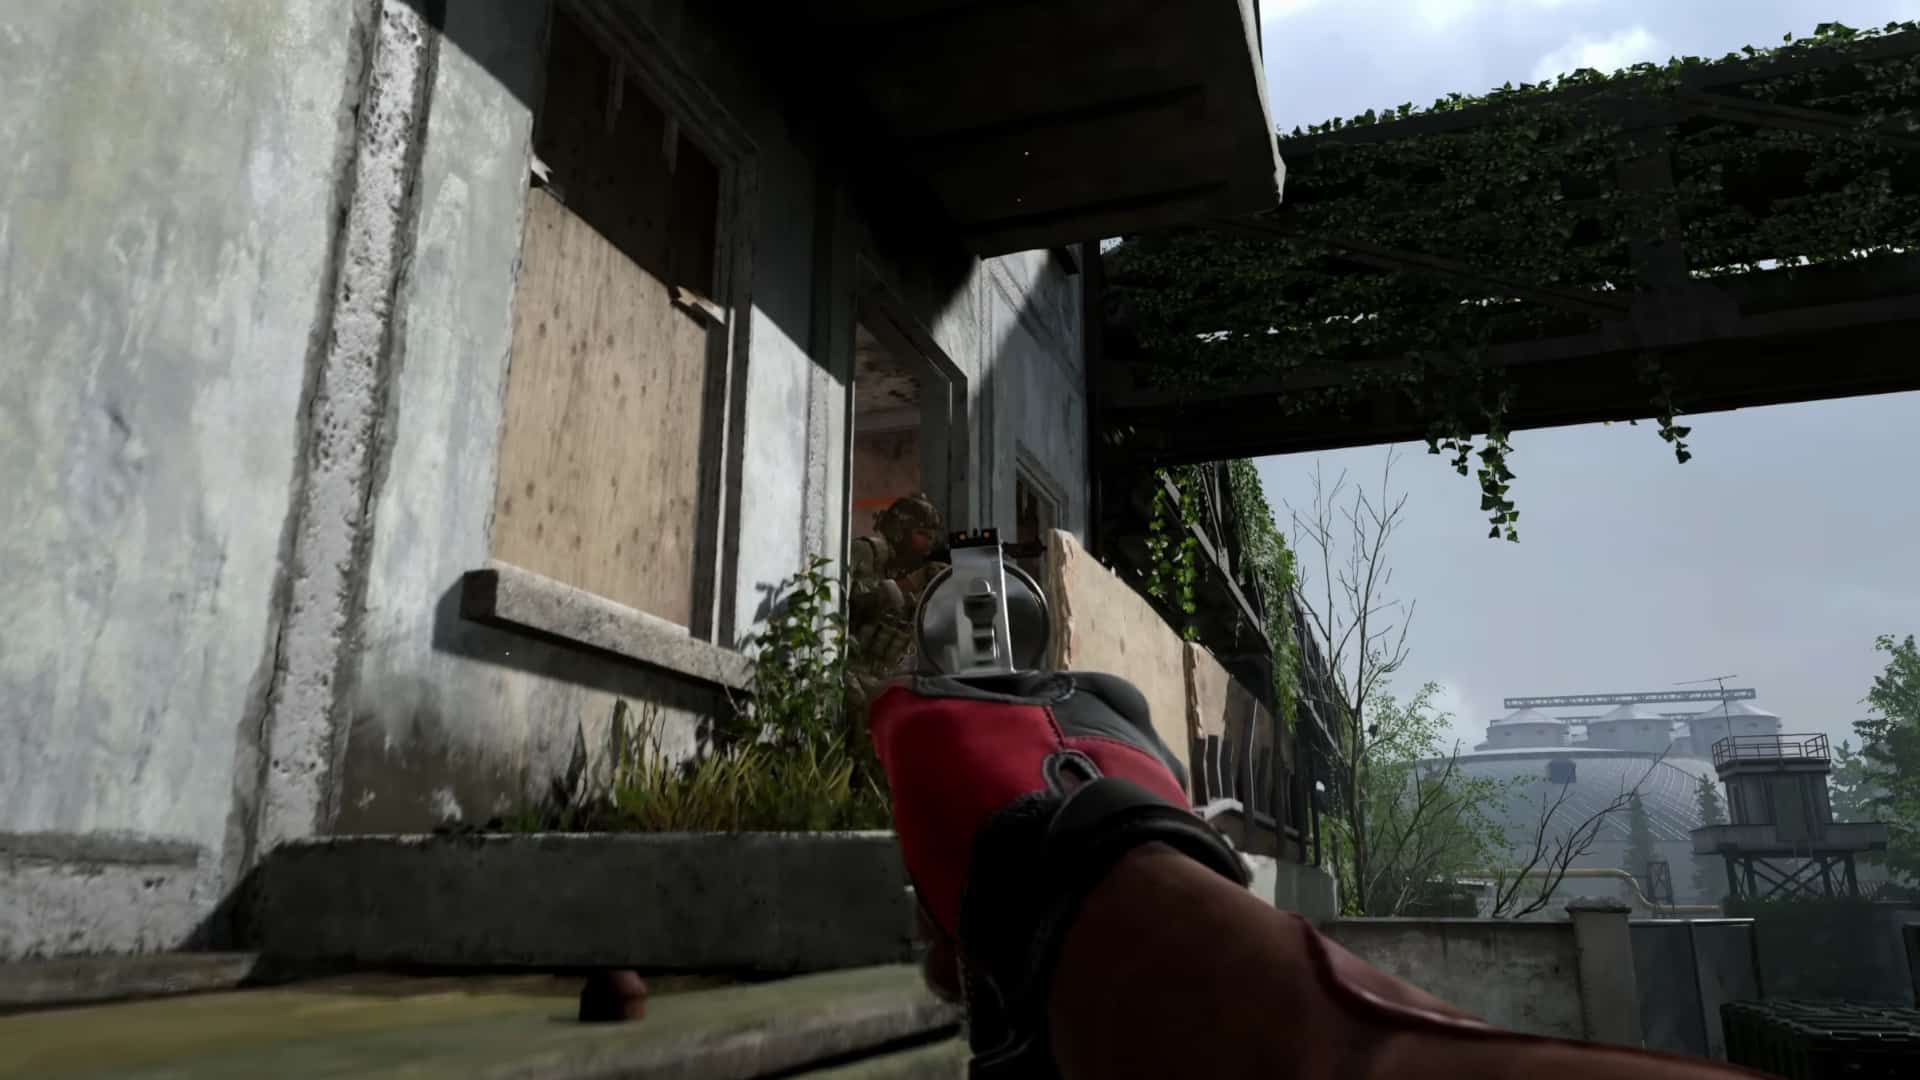 (Before you climb the building completely and be an easy target, you can look over the edge and shoot with pistols.)